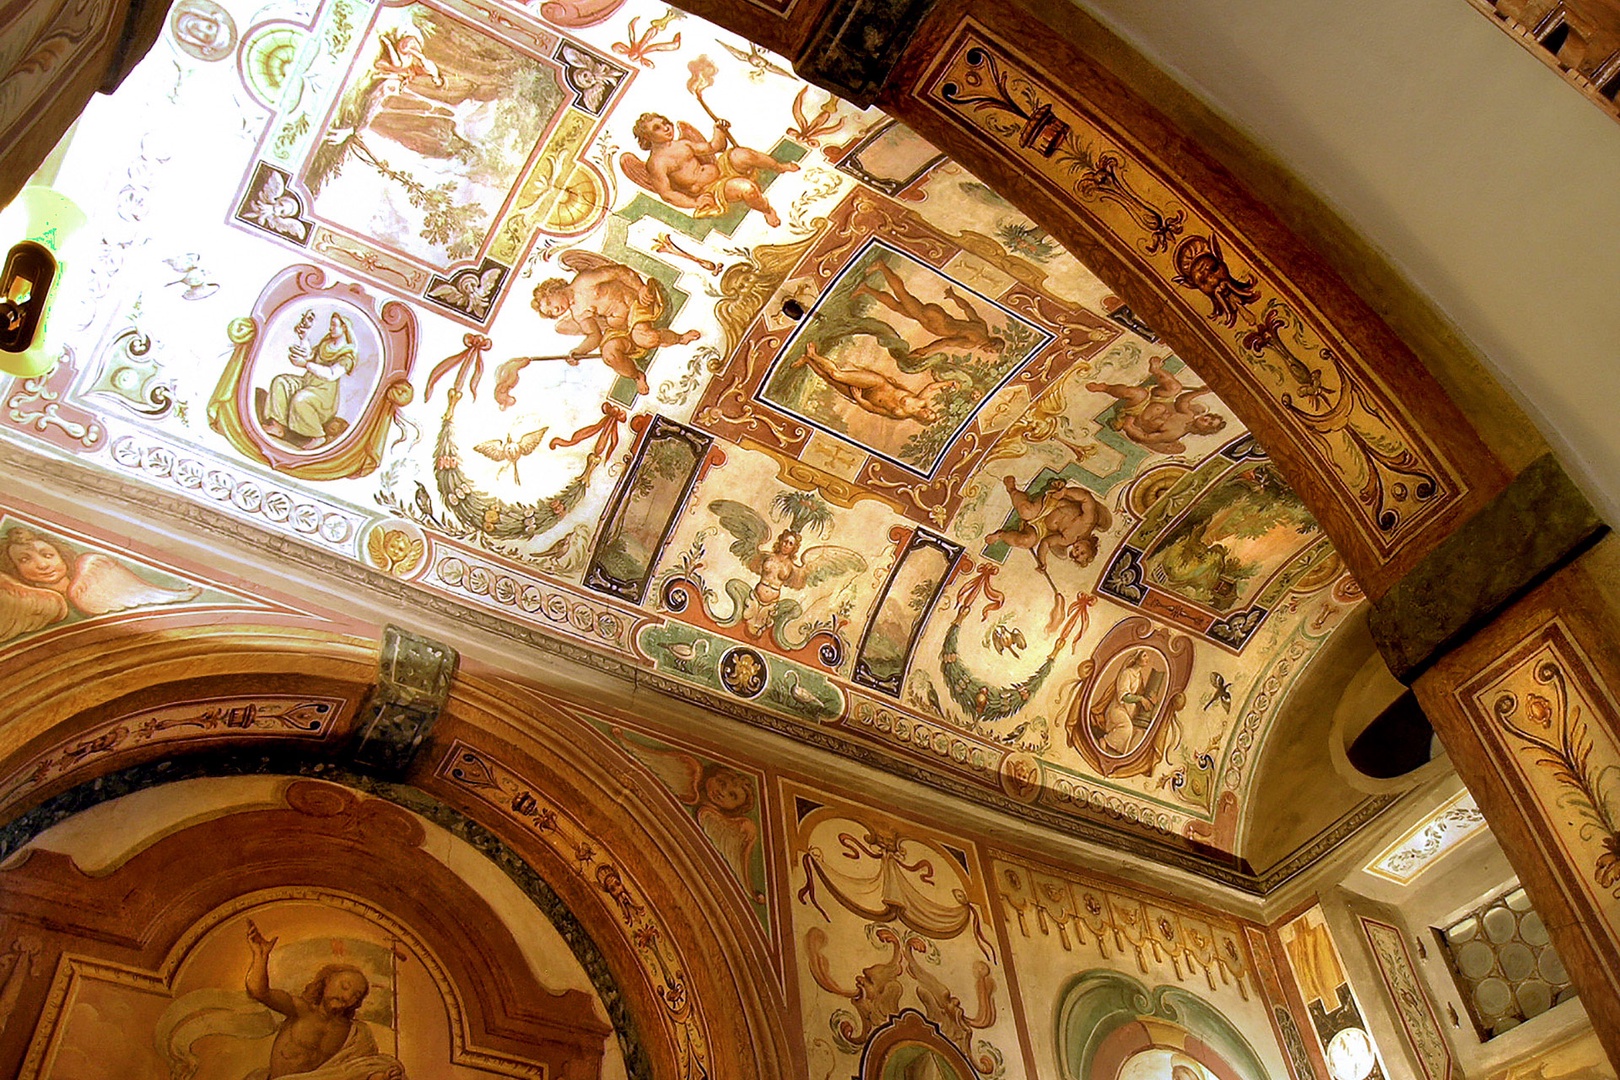 Entry hall frescoes date from the 1700s